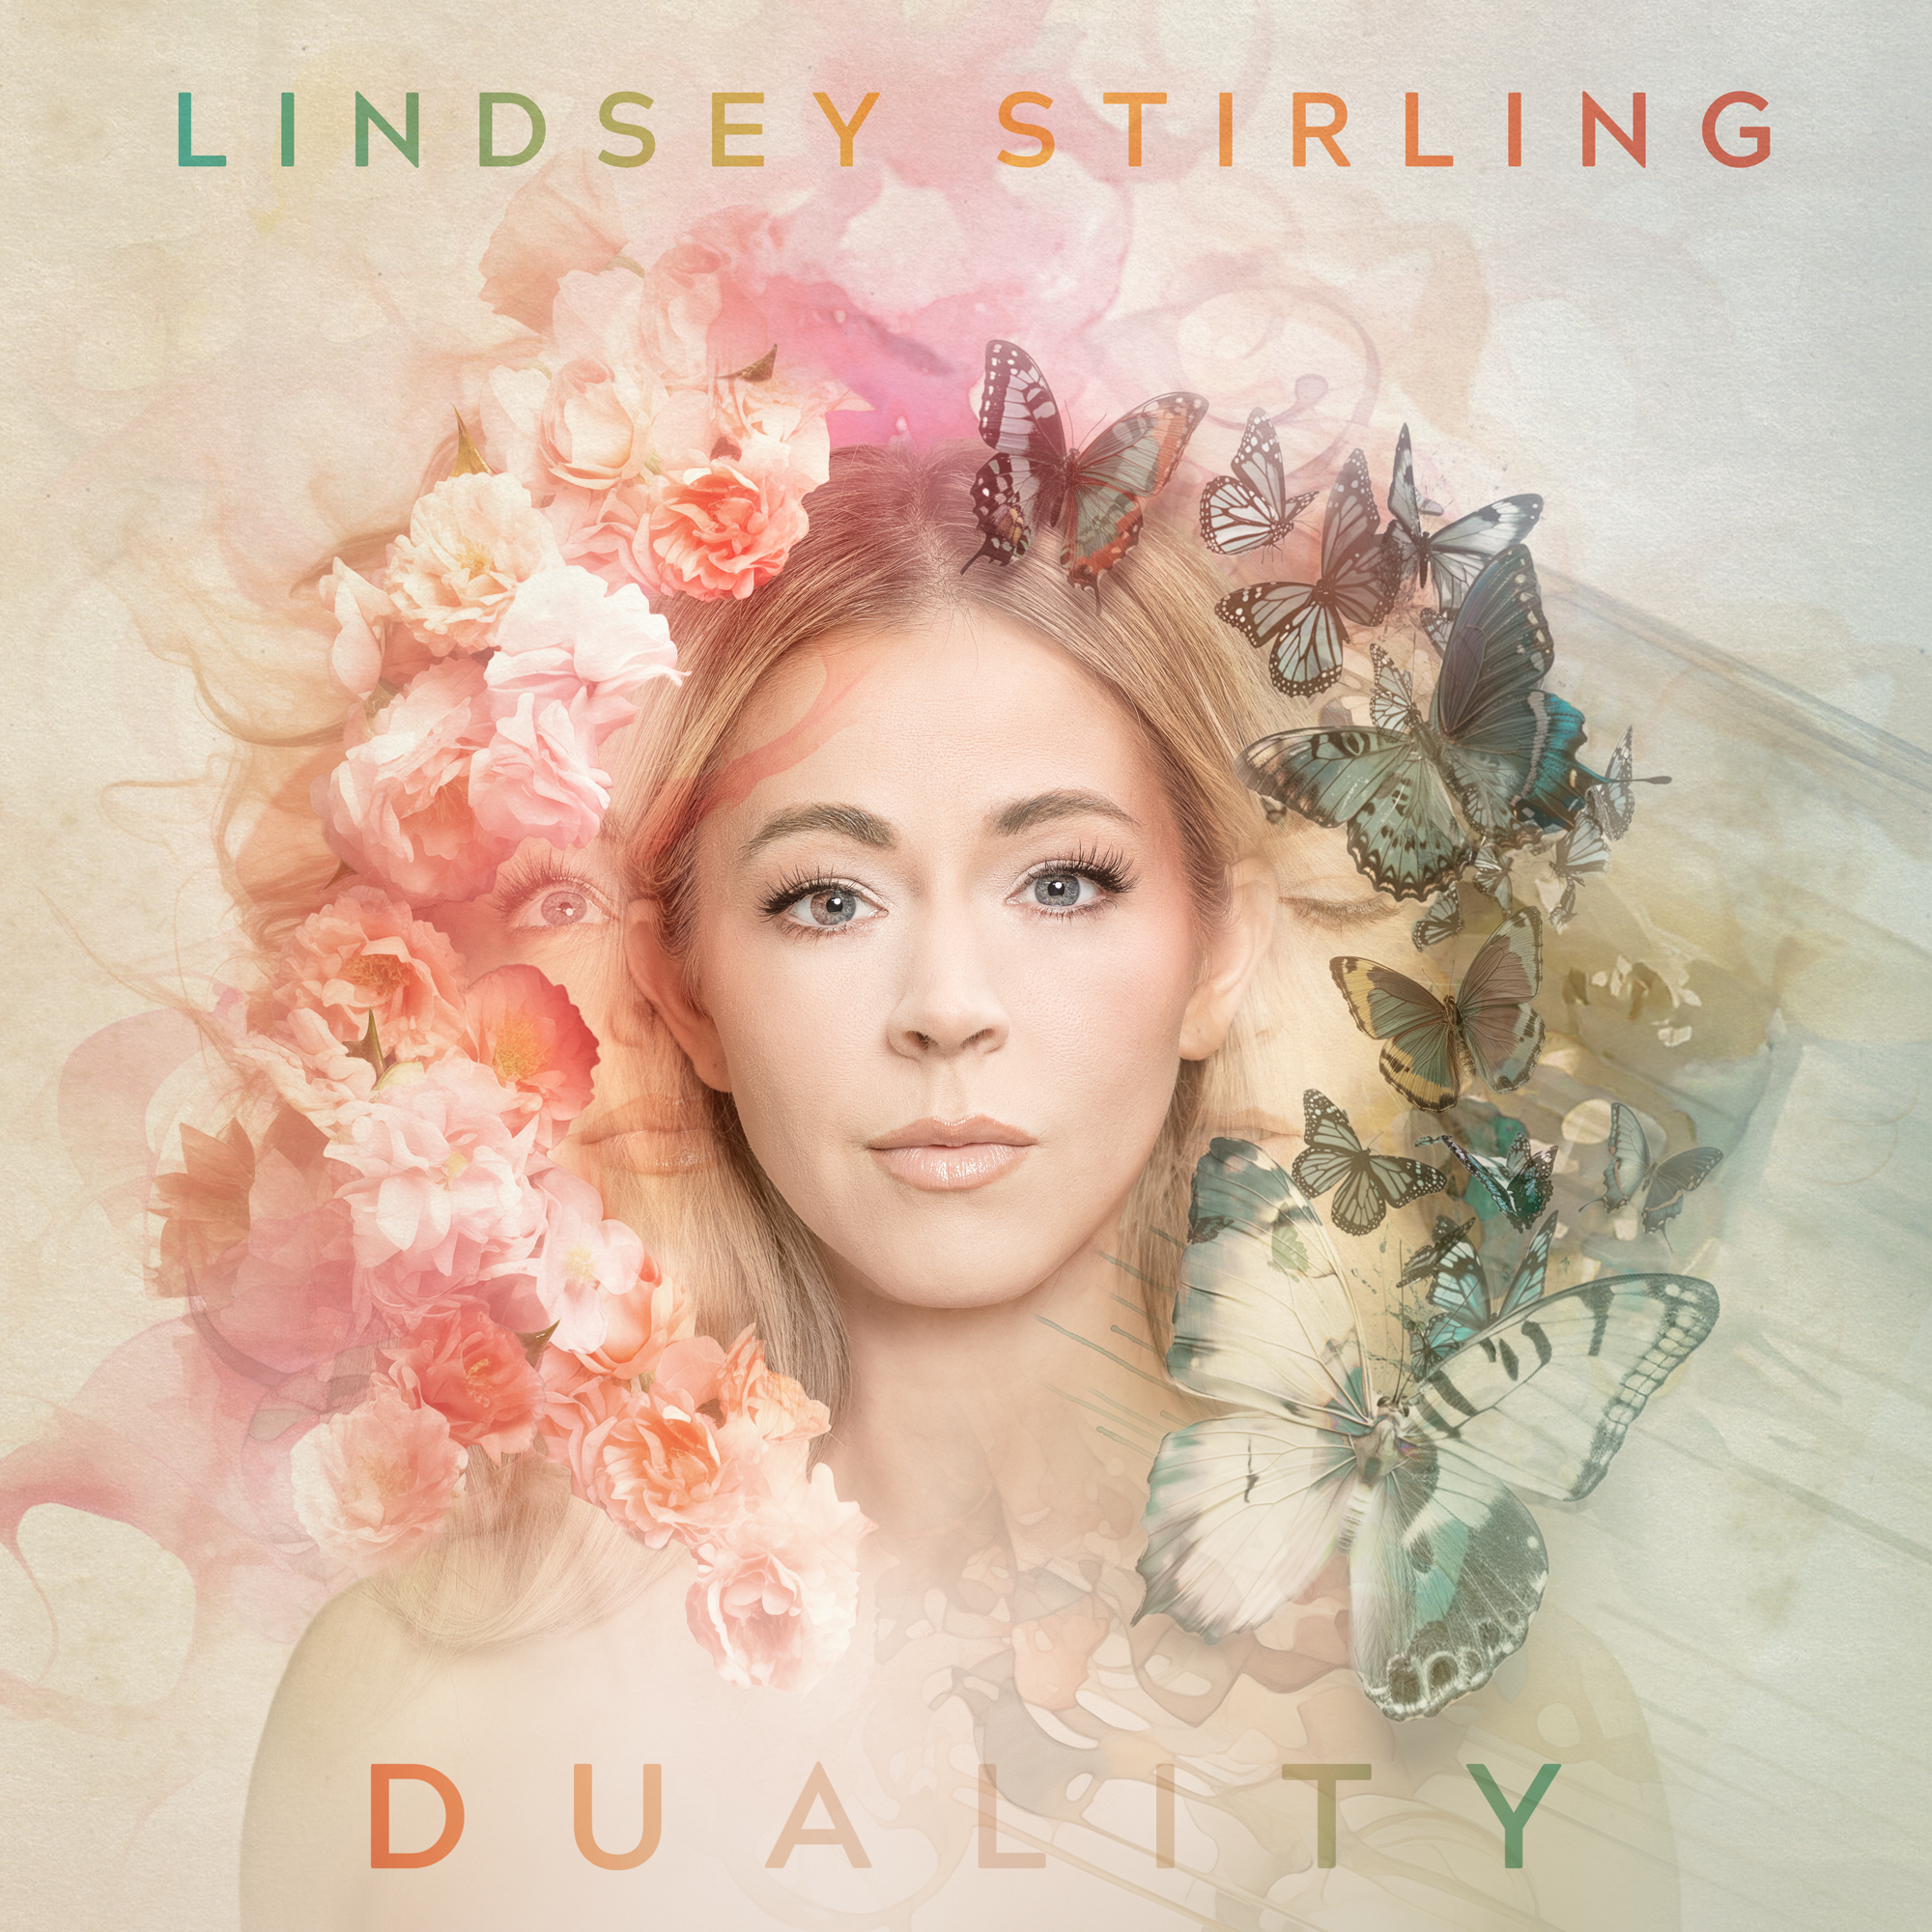 Lindsey Stirling - Duality: CD